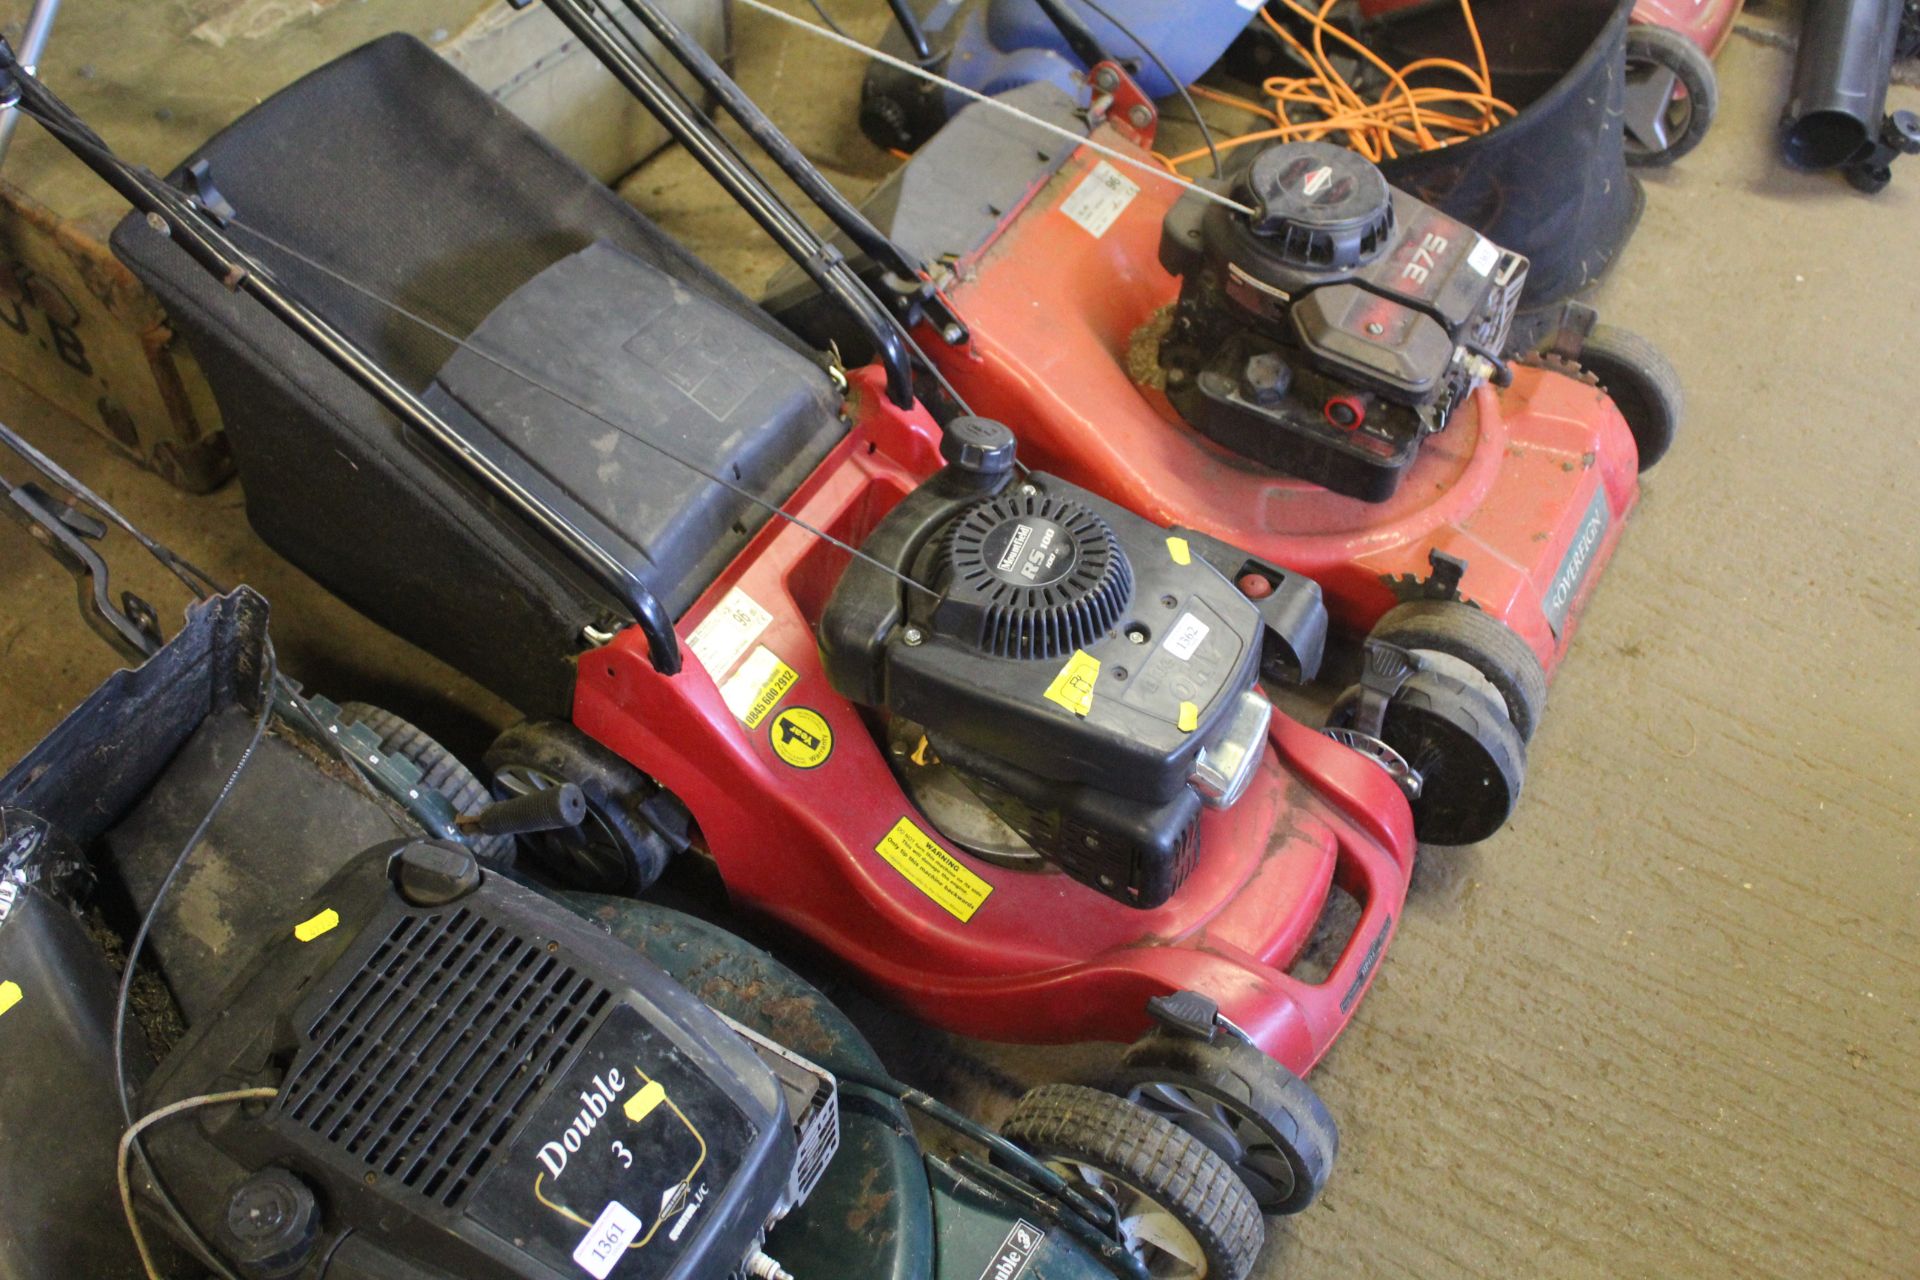 A Mountfield HP 414 rotary garden mower with Mount